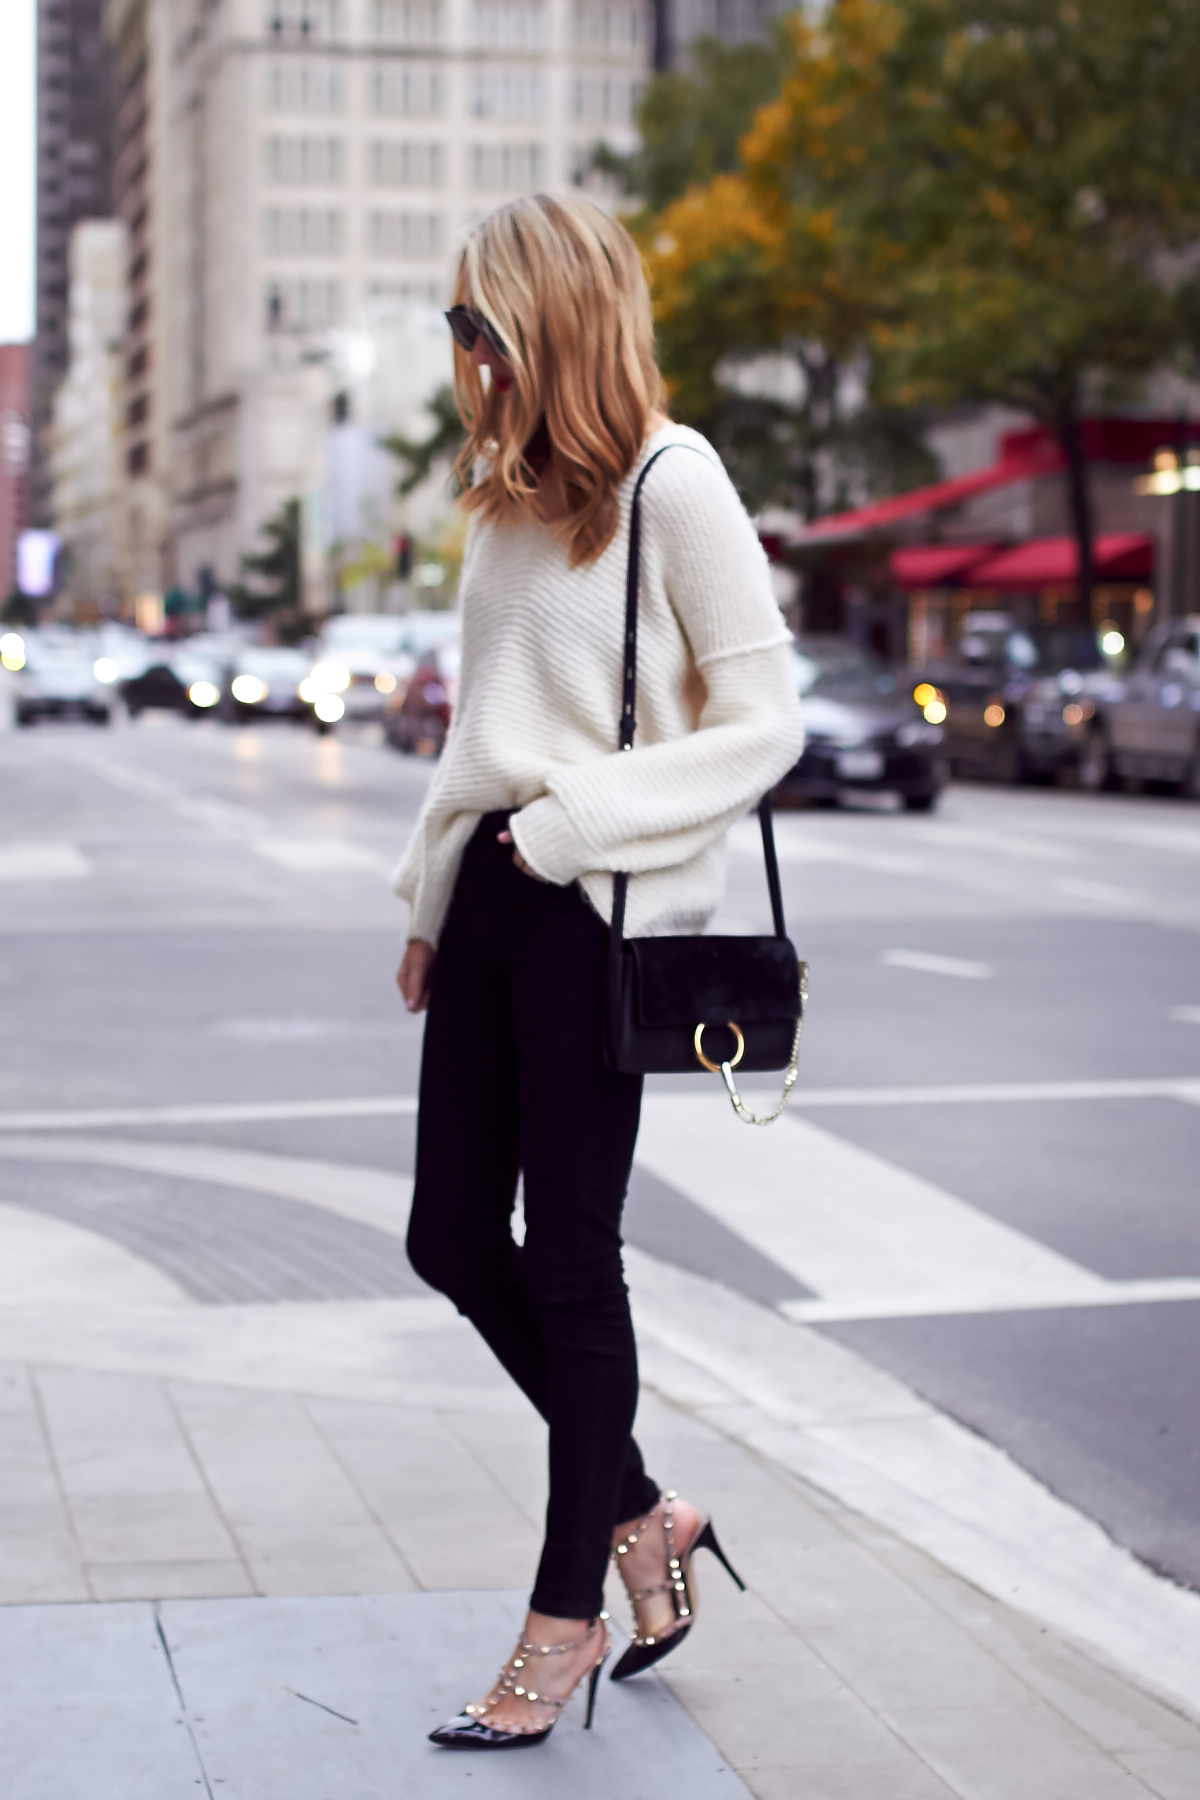 Fall Outfit, Winter Outfit, Ivory Sweater, Black Skinny Jeans, Valentino Rockstud Pumps, Chloe Faye Handbag, Red Lipstick